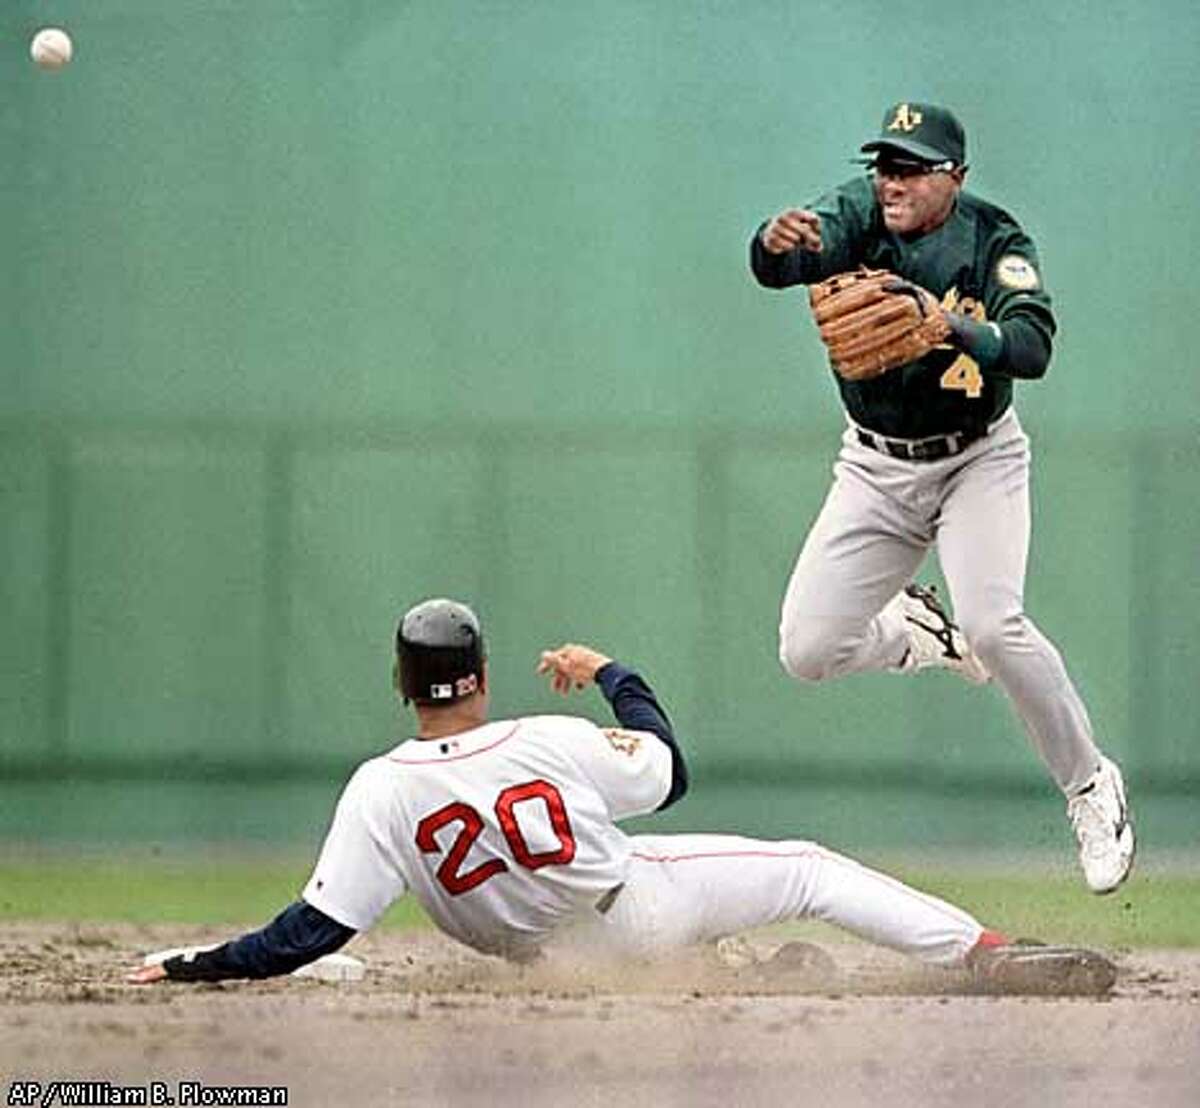 Oakland Athletics' Miguel Tejada fires to first after tagging Boston Red Sox' Darren Lewis to make the double play off a Trot Nixon grounder Sunday, May, 13, 2001, at Fenway Park in Boston. The Red Sox beat the A's 5-4. (AP Photo/William B. Plowman)